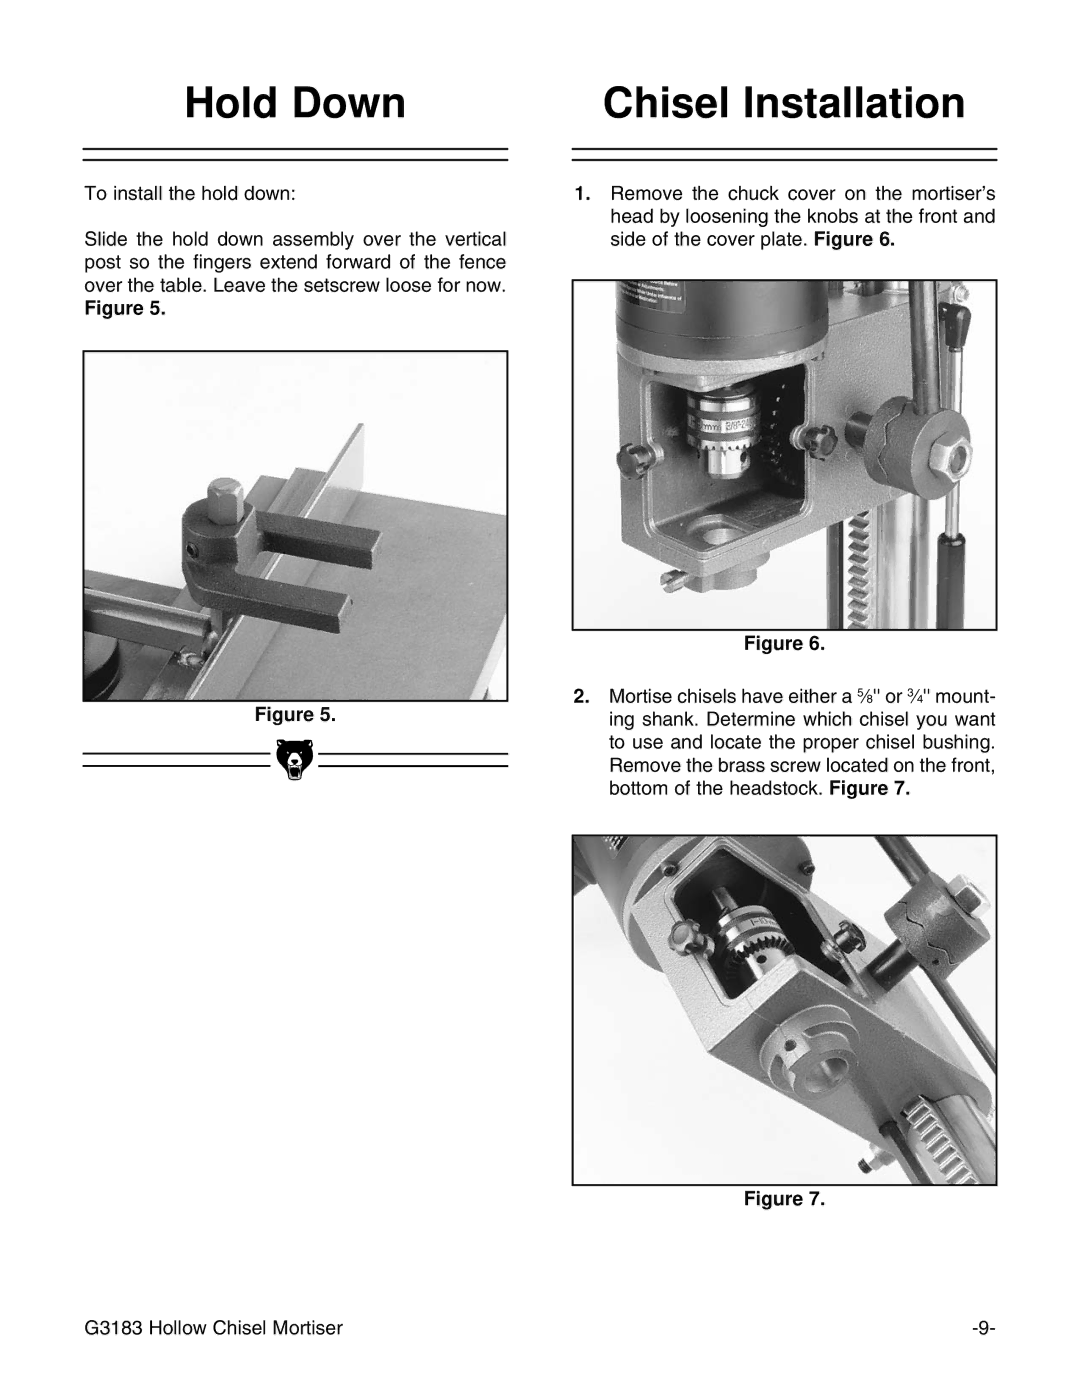 Grizzly G3183 instruction manual Hold Down Chisel Installation 